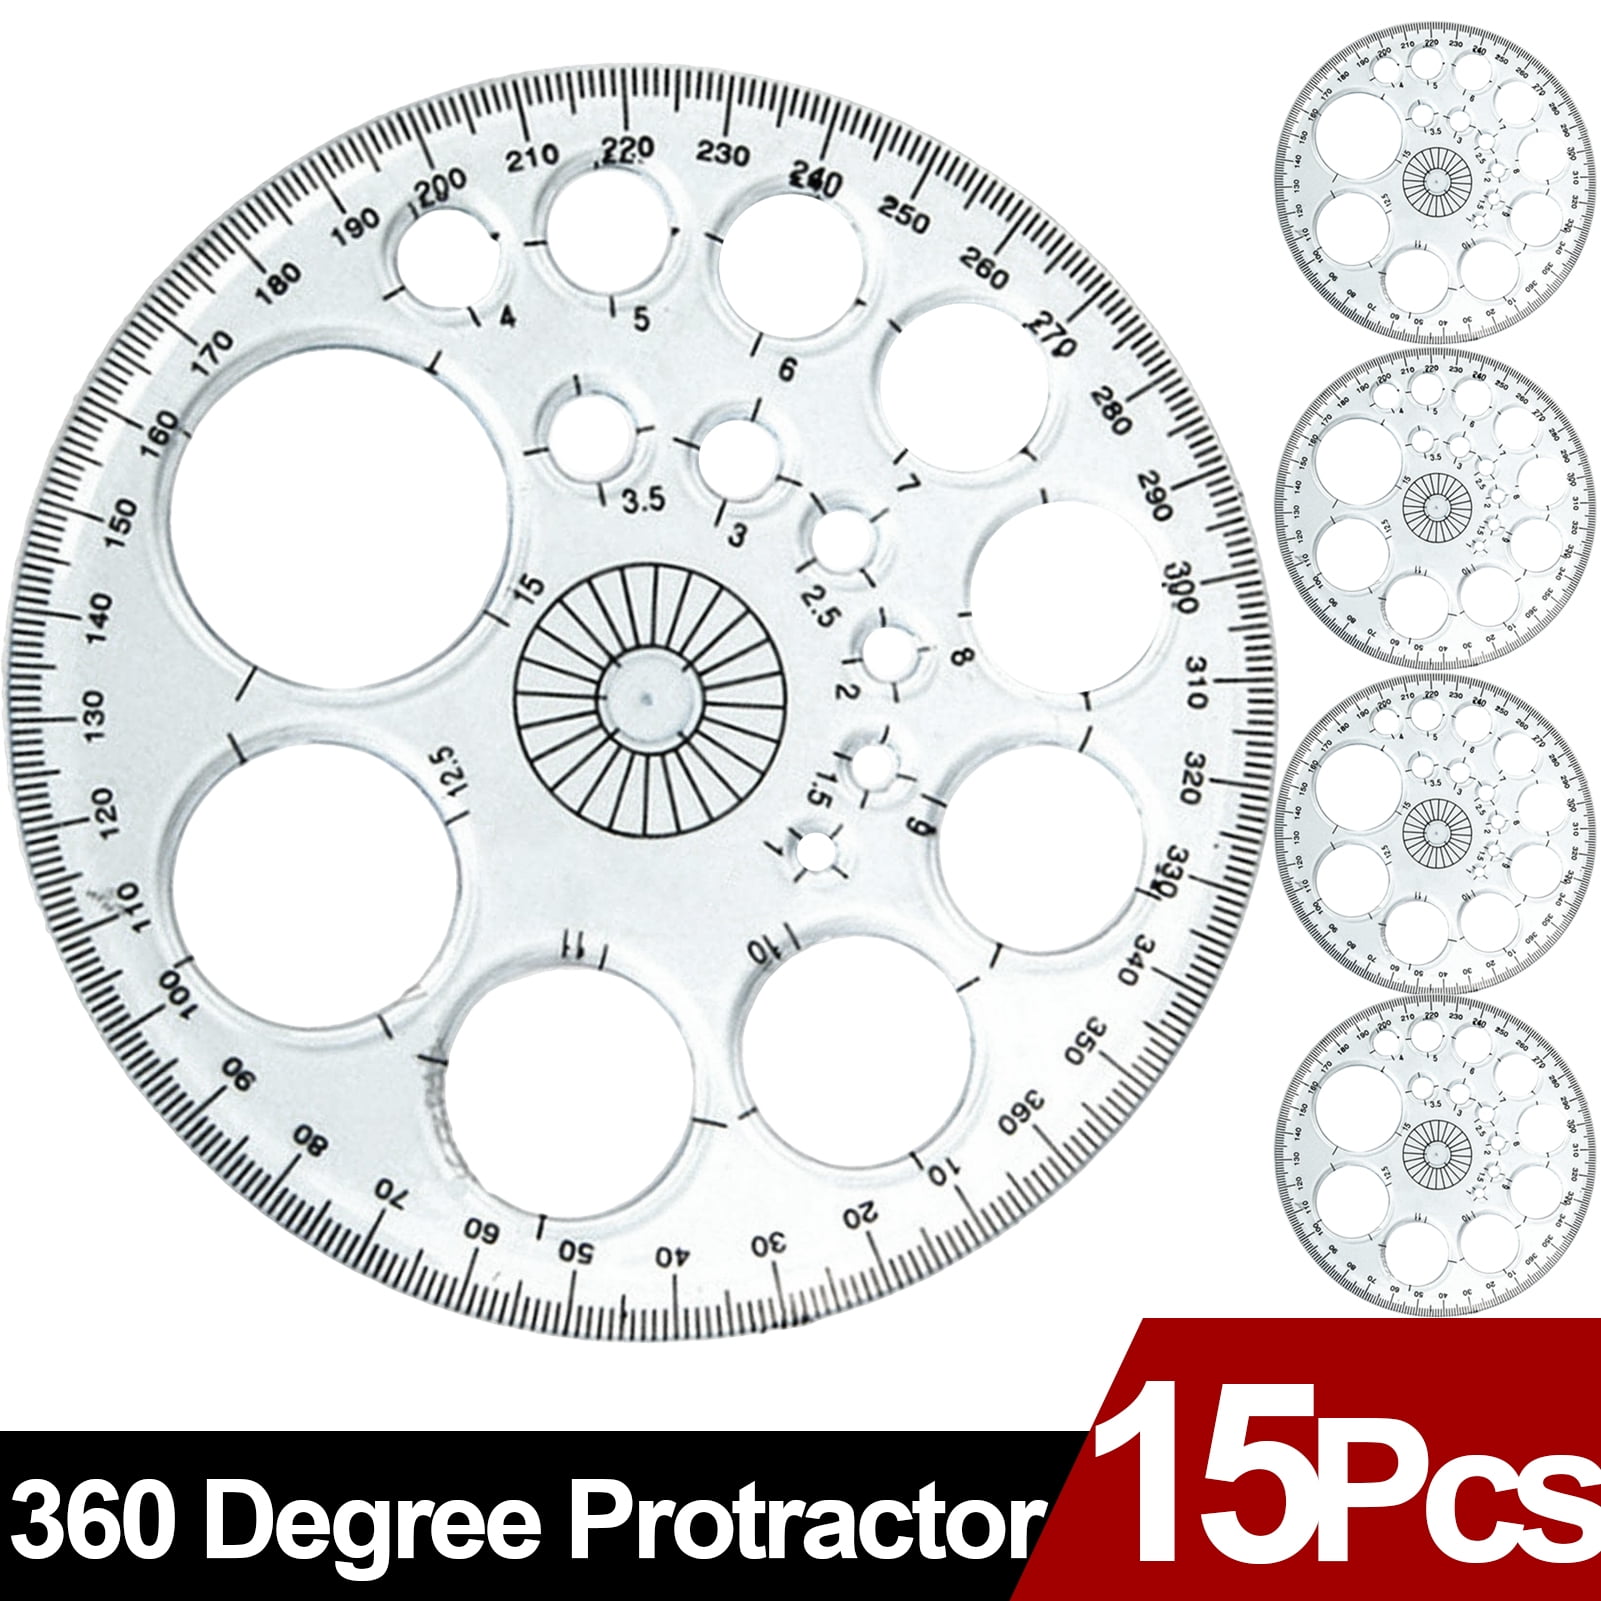 Multi-size Plastic Protractor 360 Degrees Math Protractors Clear Circular Protractors Mathematical Tool for Angle Measurement 4 Inch, 6 Inch, 9 Inch, 12 Inch Student School Office Supplies 